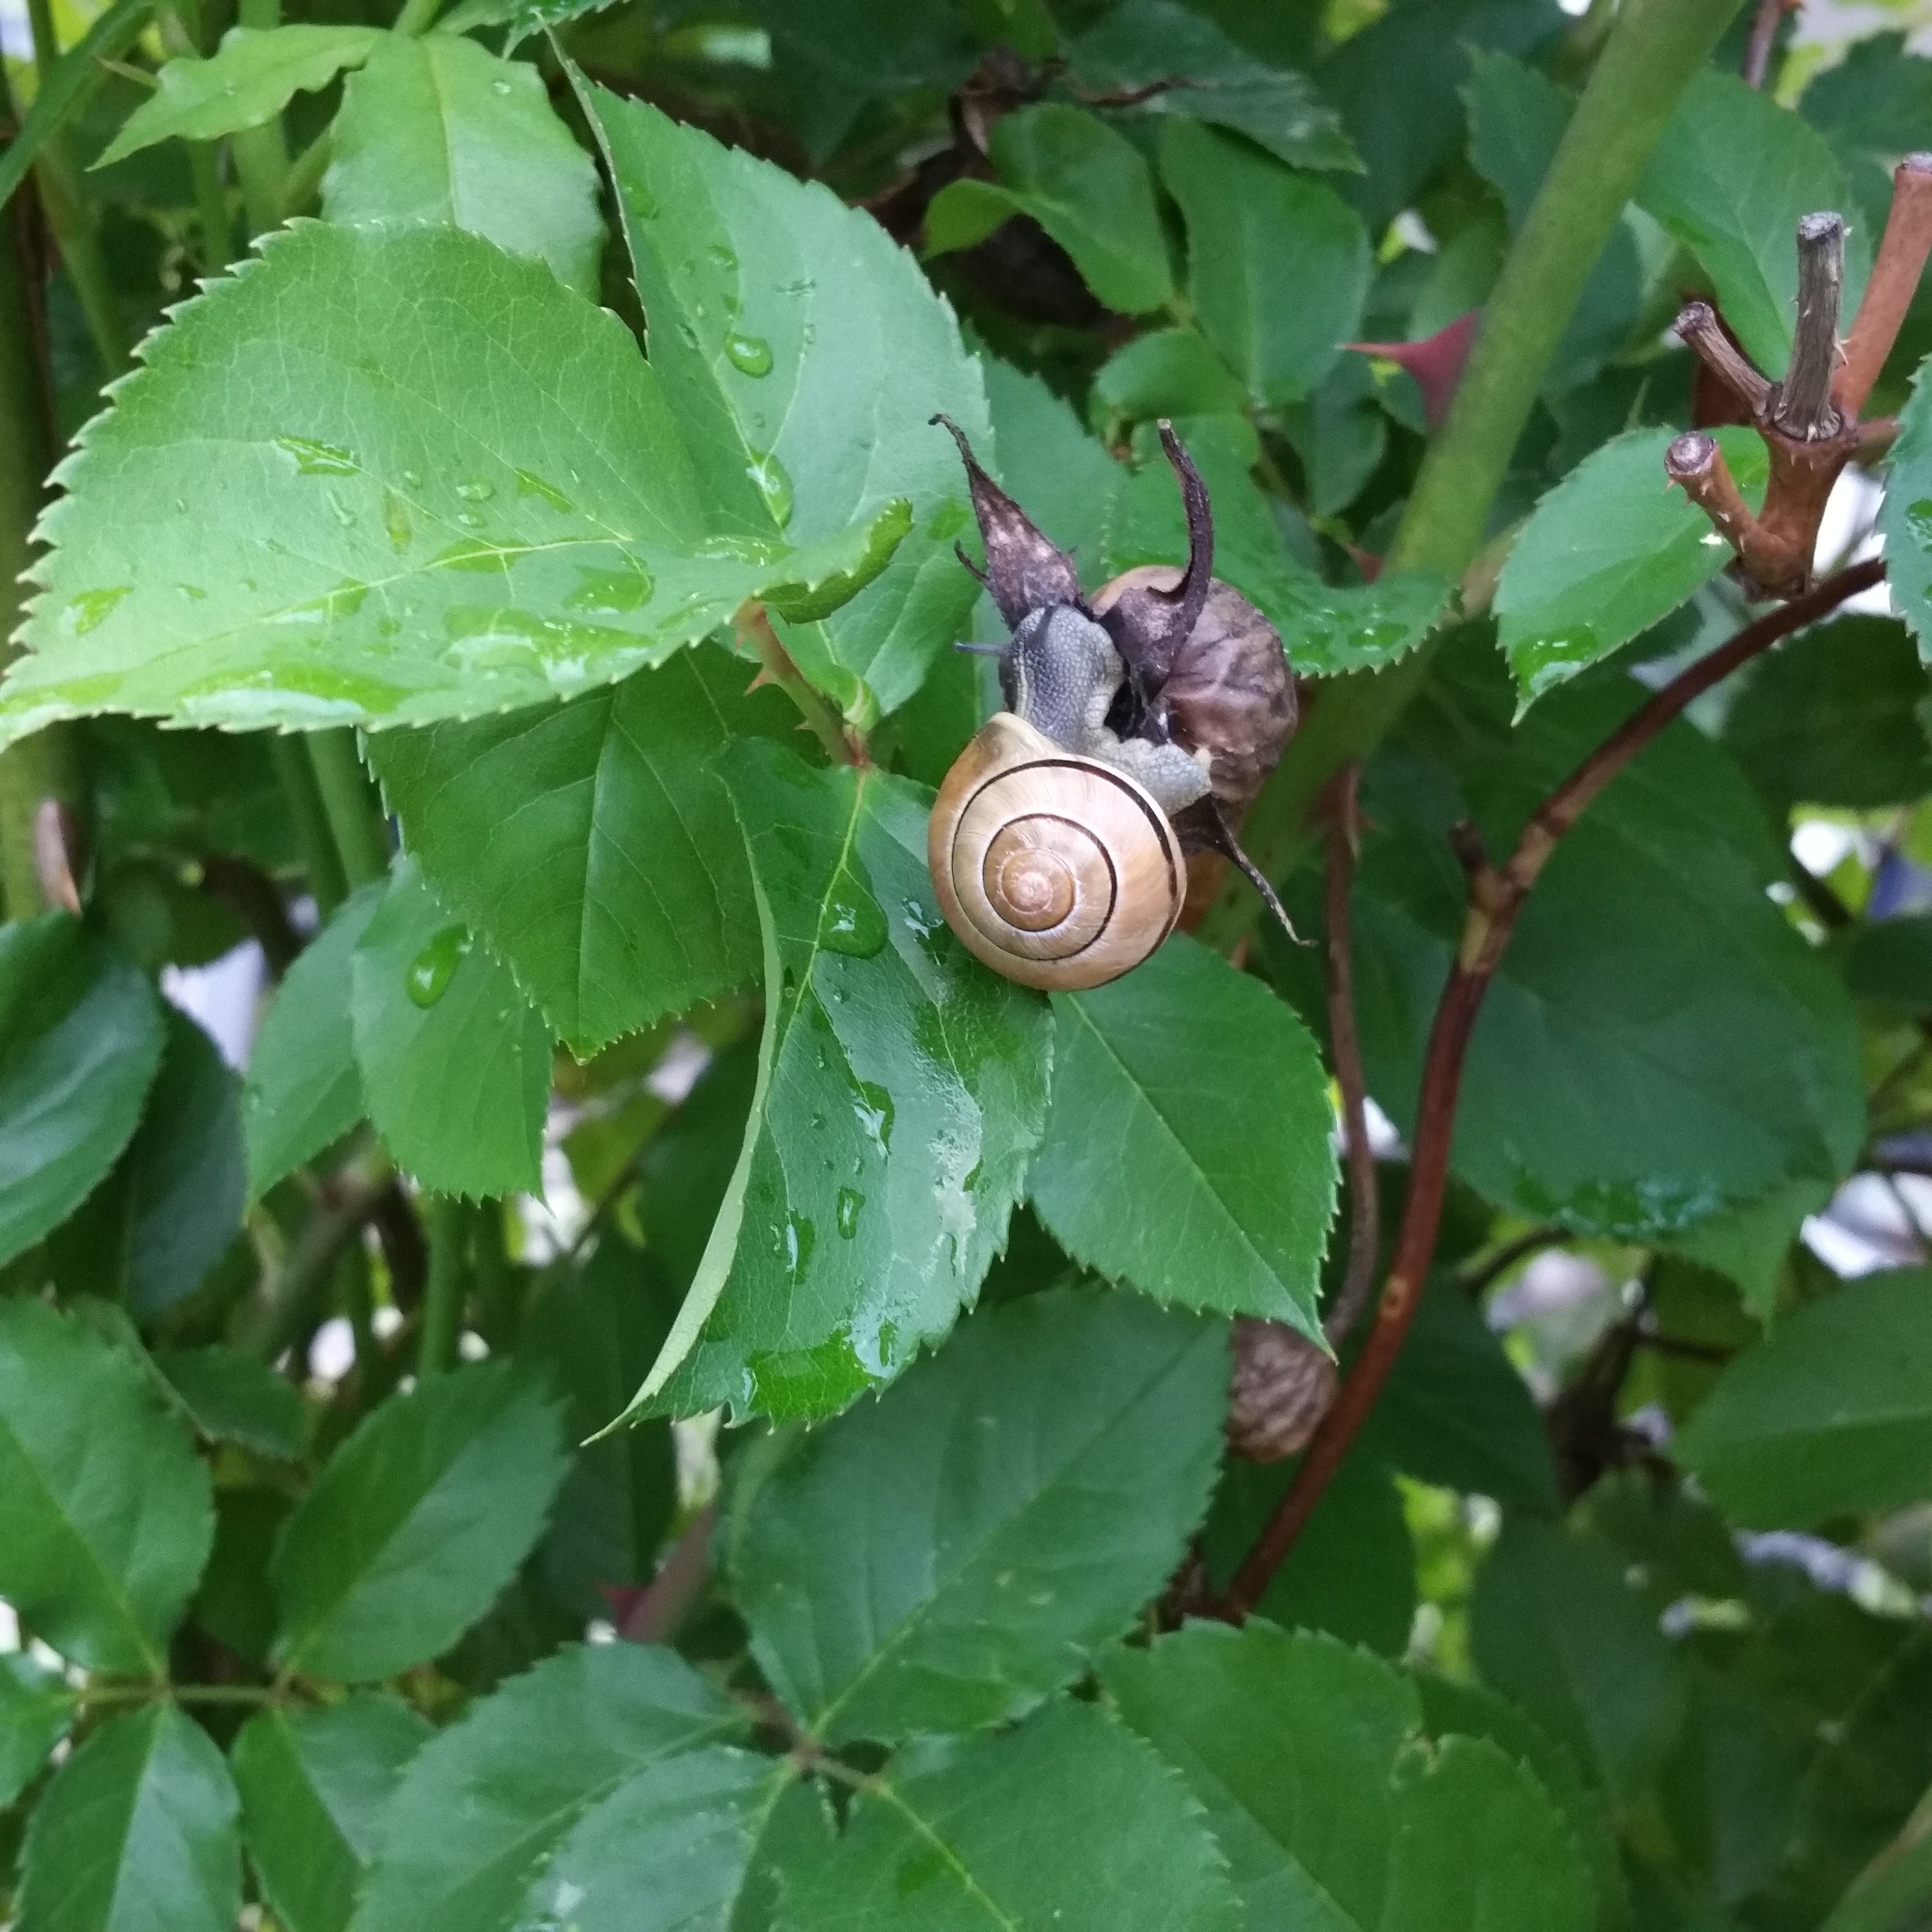 snail on green tree with dewdrops during daytime